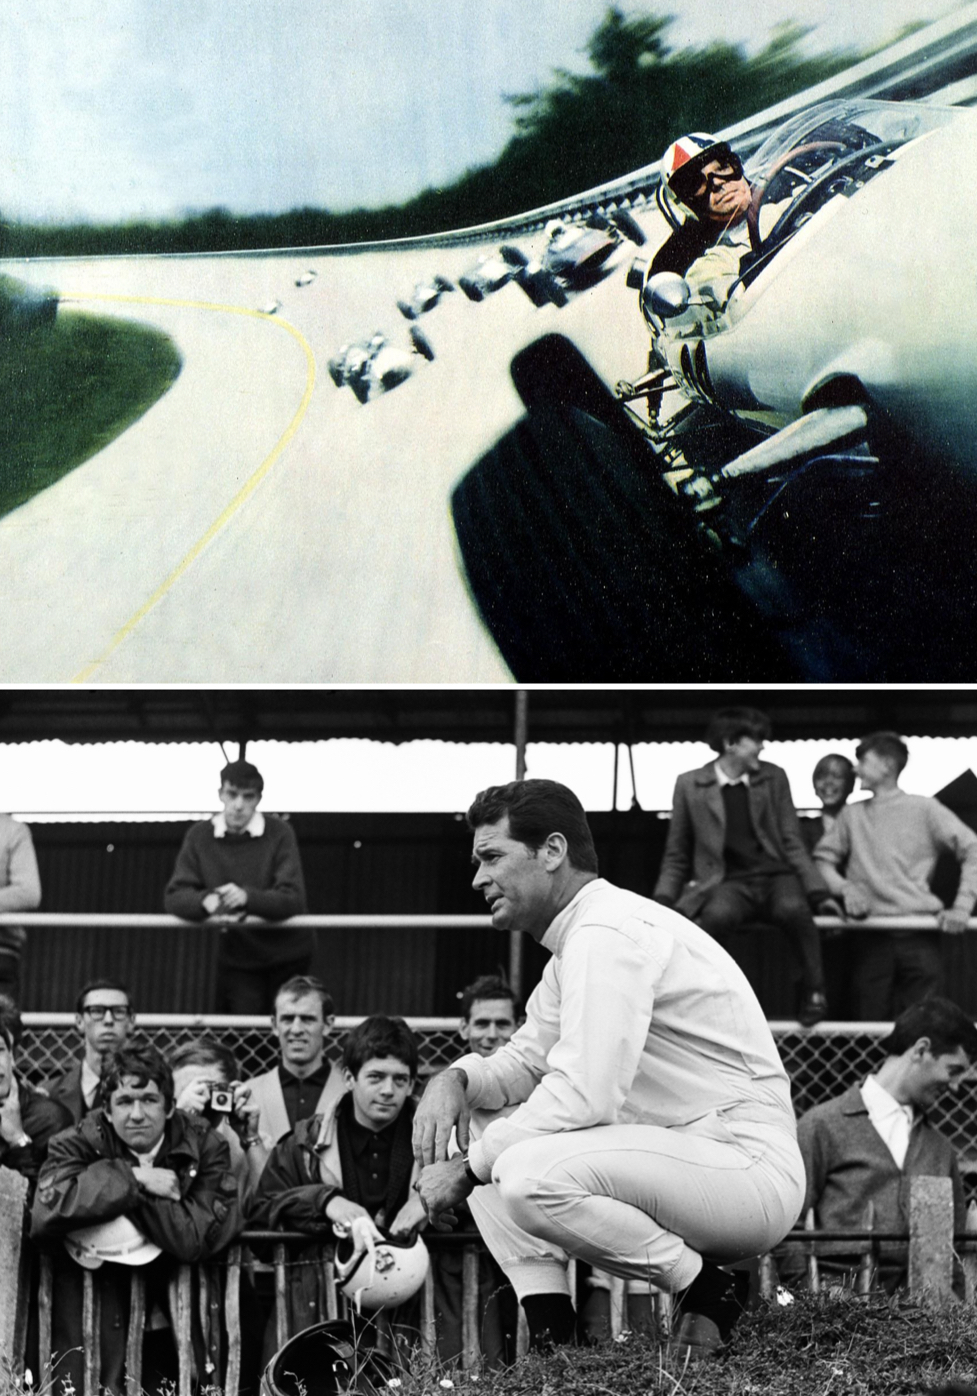 <strong>ROAD WARRIORS</strong><br/><span>Scenes from the film <em>Grand Prix</em>, starring James Garner, Toshiro Mifune, and Françoise Hardy, among others. It won three Oscars in 1966. </span>